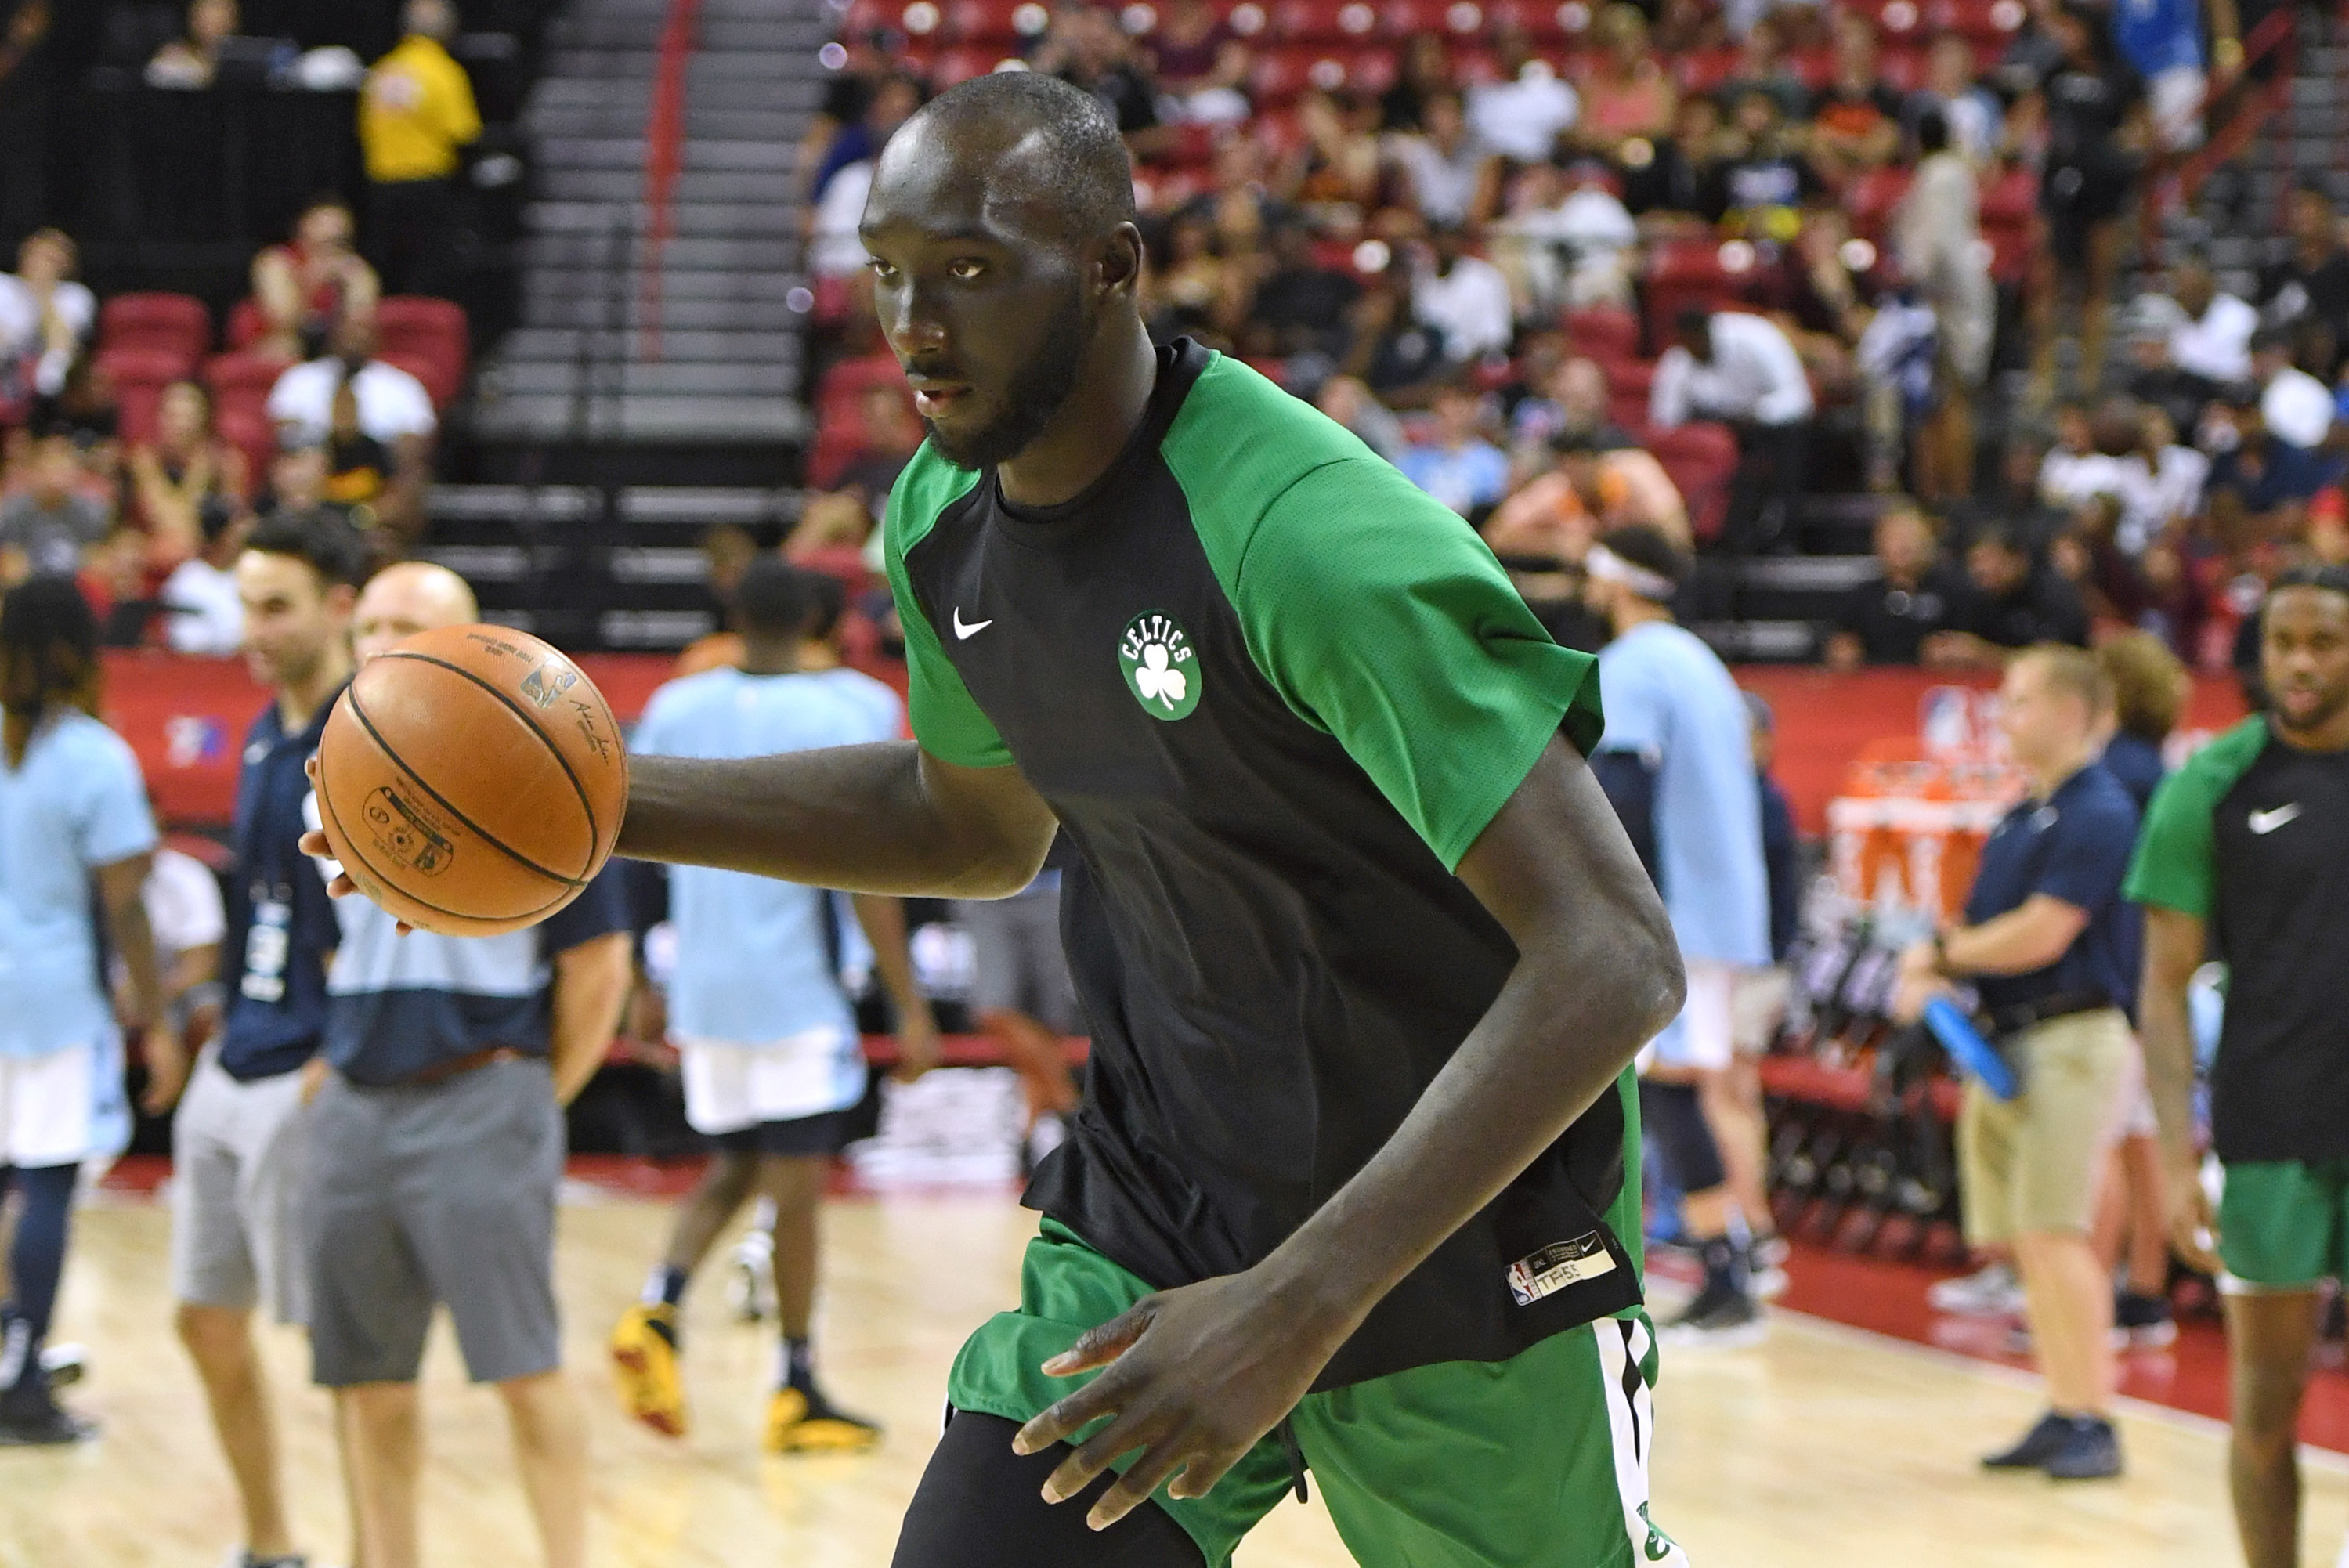 Tacko Fall is gunning for another shot at the NBA in Las Vegas